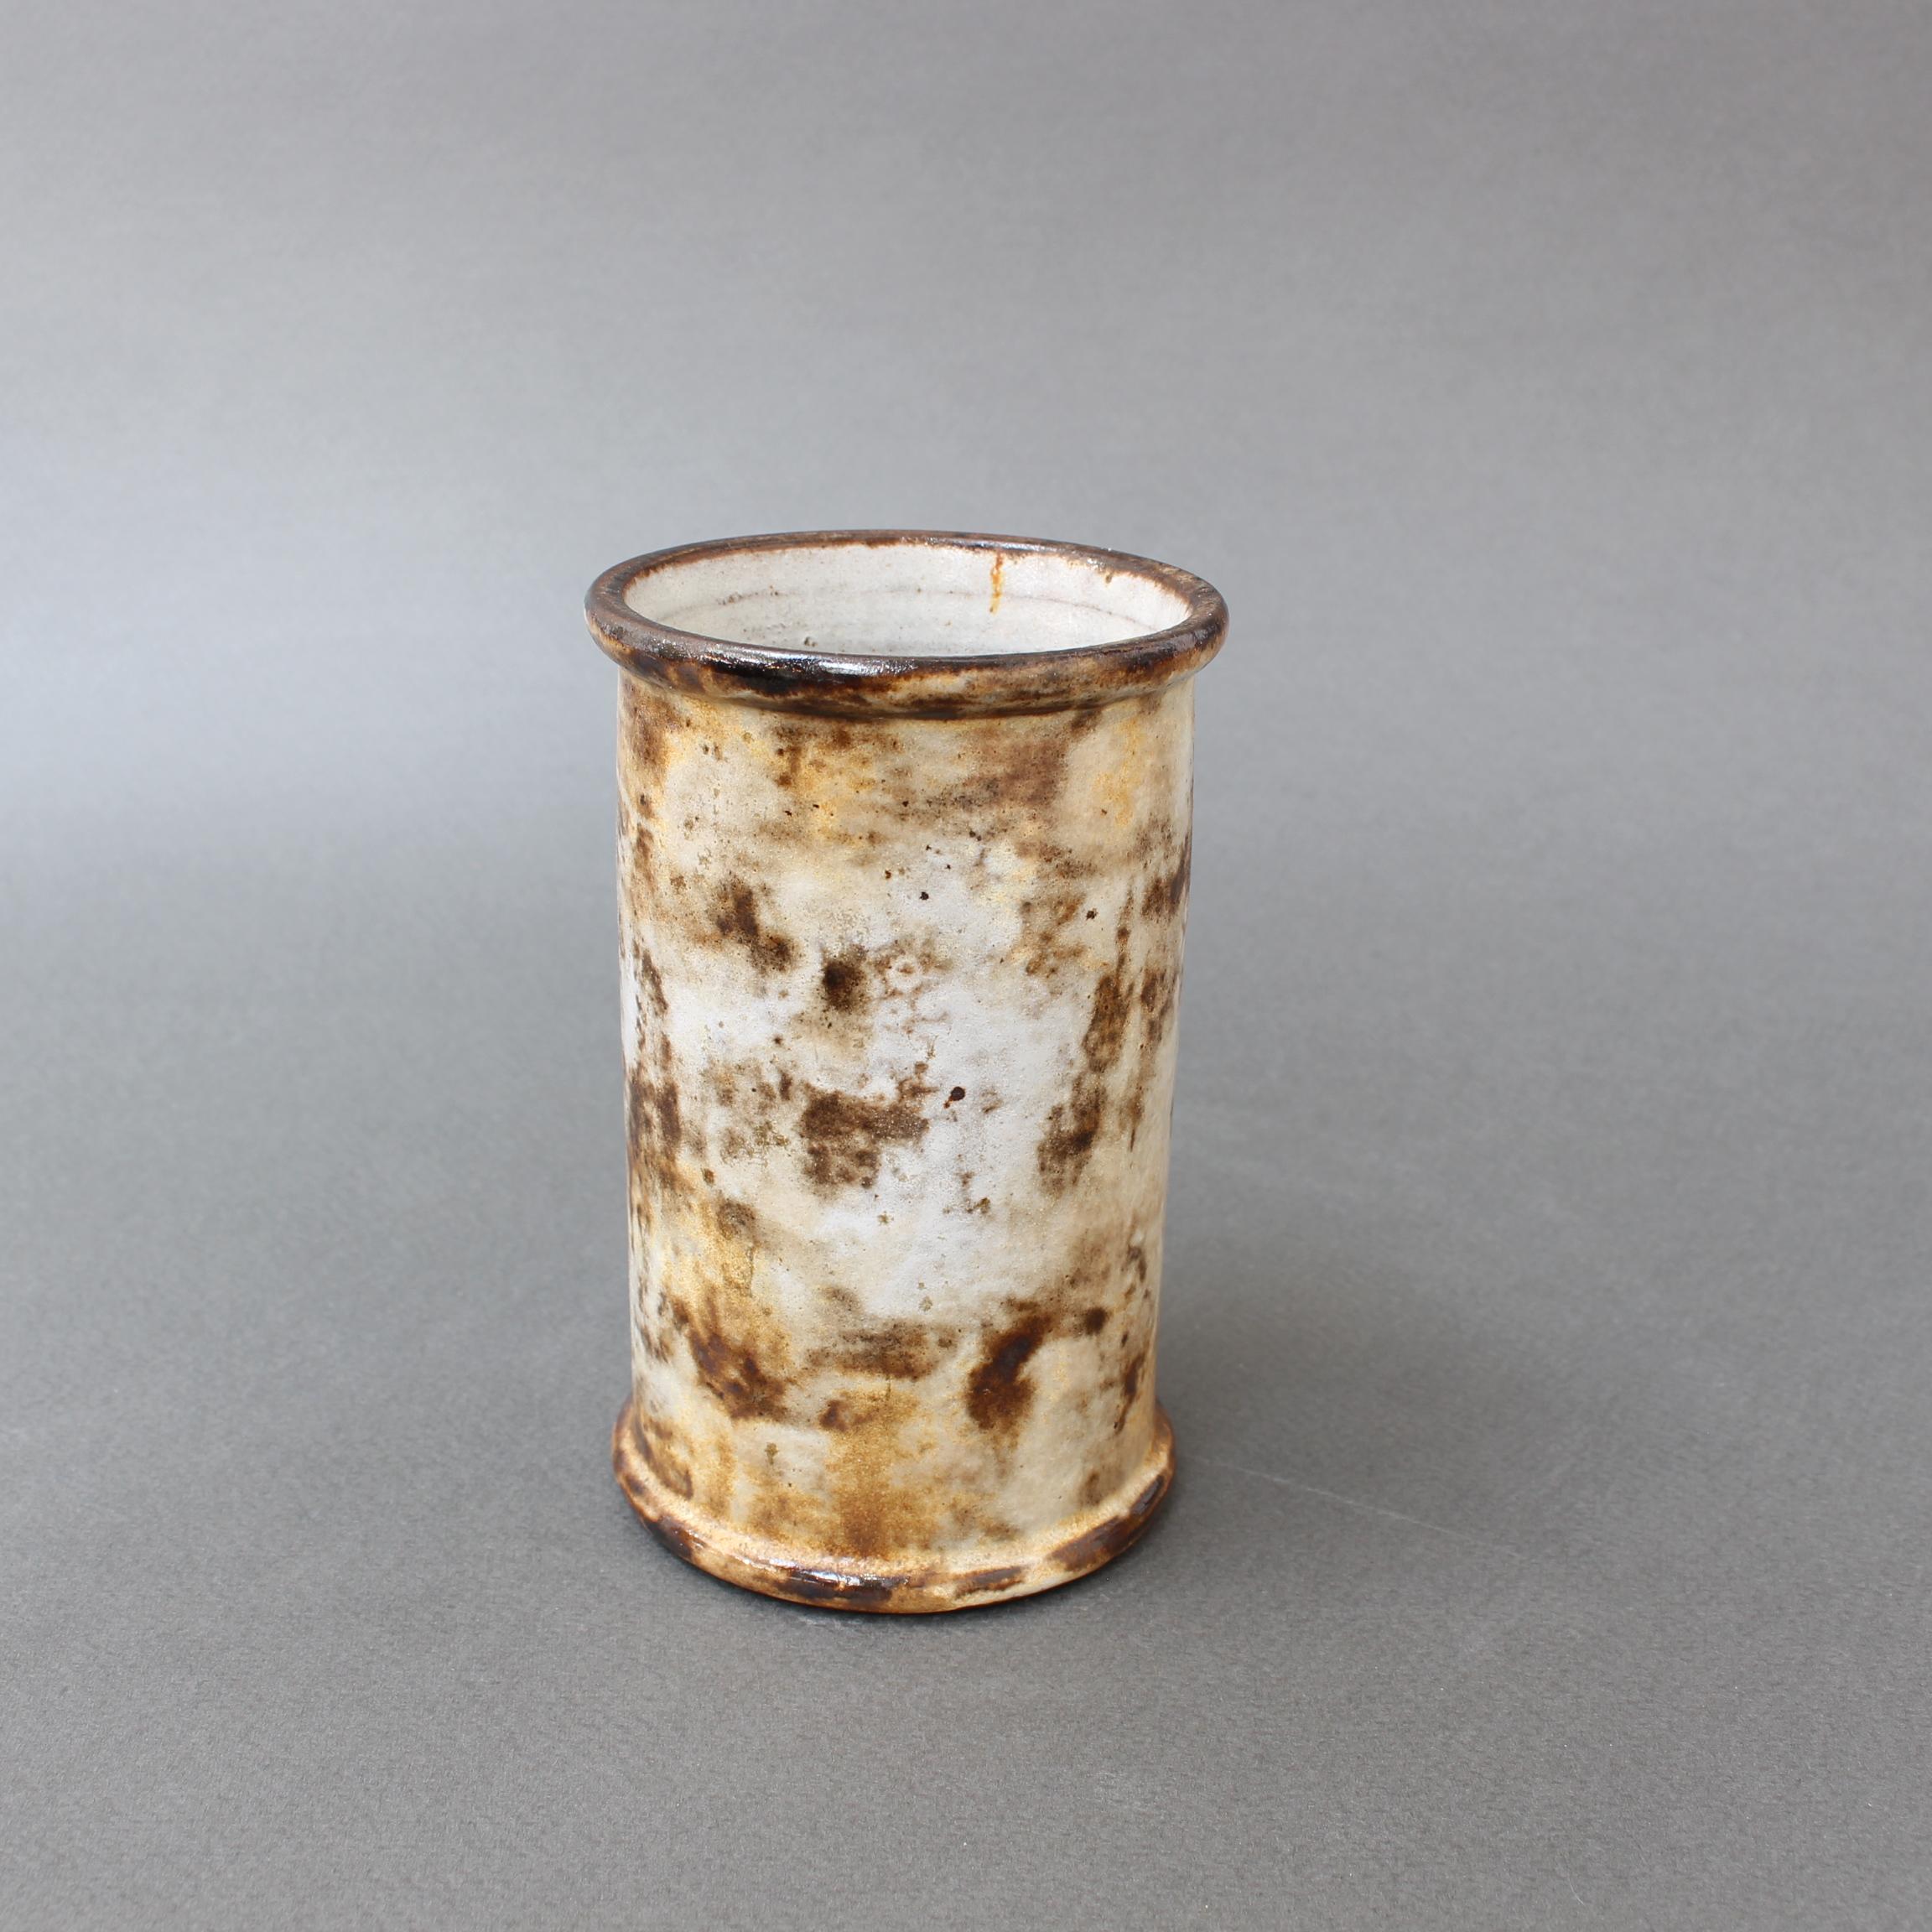 Small ceramic vase by Alexandre Kostanda, (circa 1960s). This ceramic may be diminutive but it is elegant like Kostanda's larger pieces. It presents a misty appearance with earth tones in brown, beige and delicate yellows. It may be displayed on a